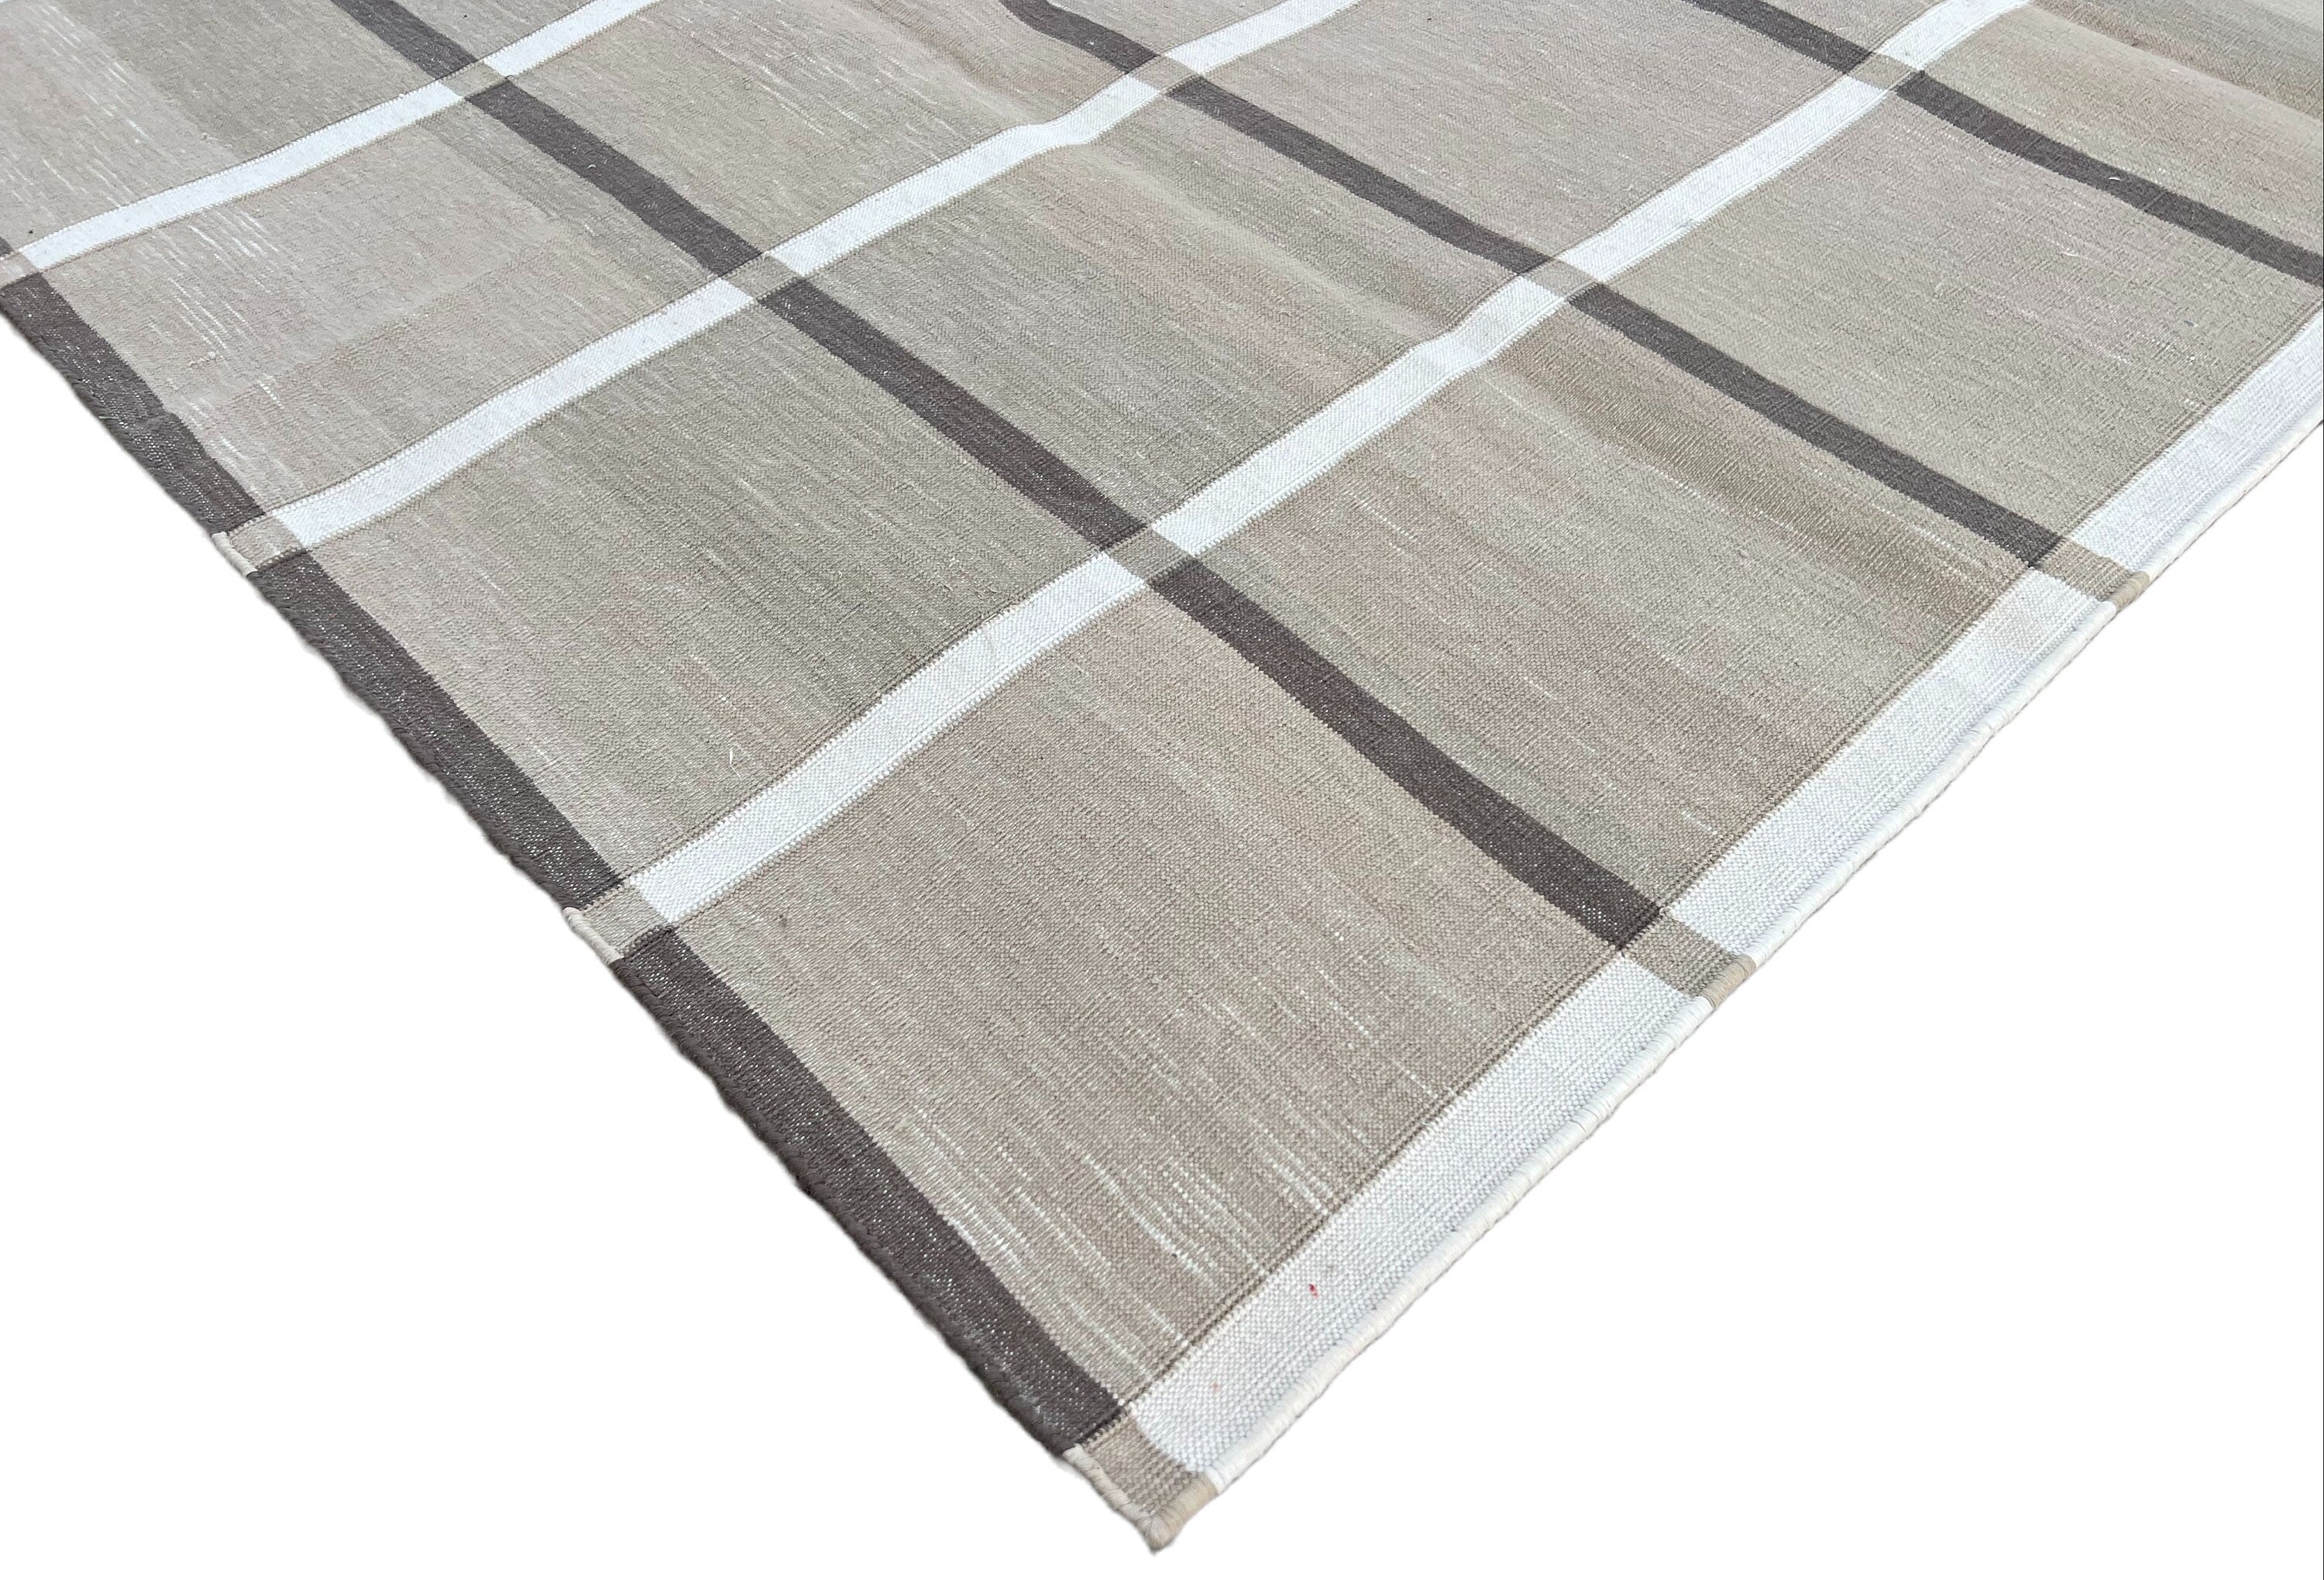 Modern Handmade Cotton Area Flat Weave Rug, Natural Vegetable Dyed, Beige & Brown Windowpane Check Indian Dhurrie, Kilim Rug, Wall Tapestry